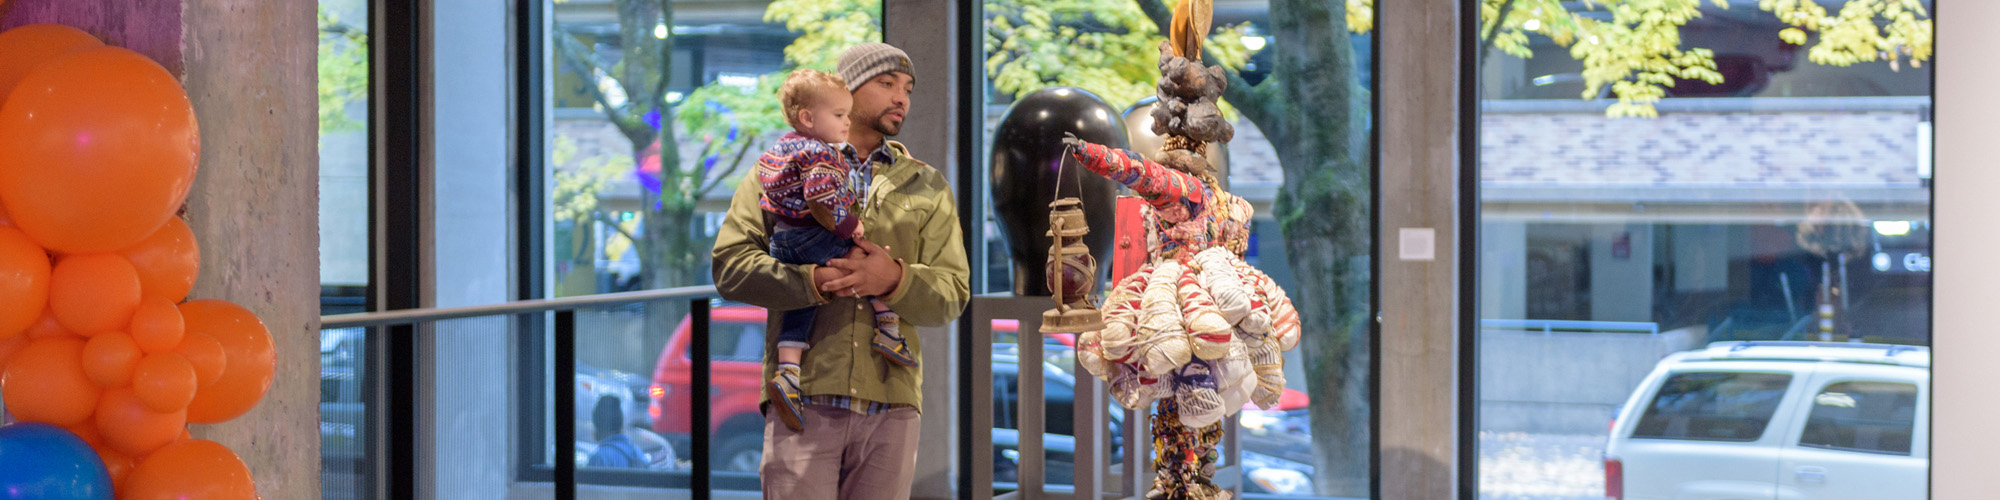 Student and his child looking at art in the Museum on campus